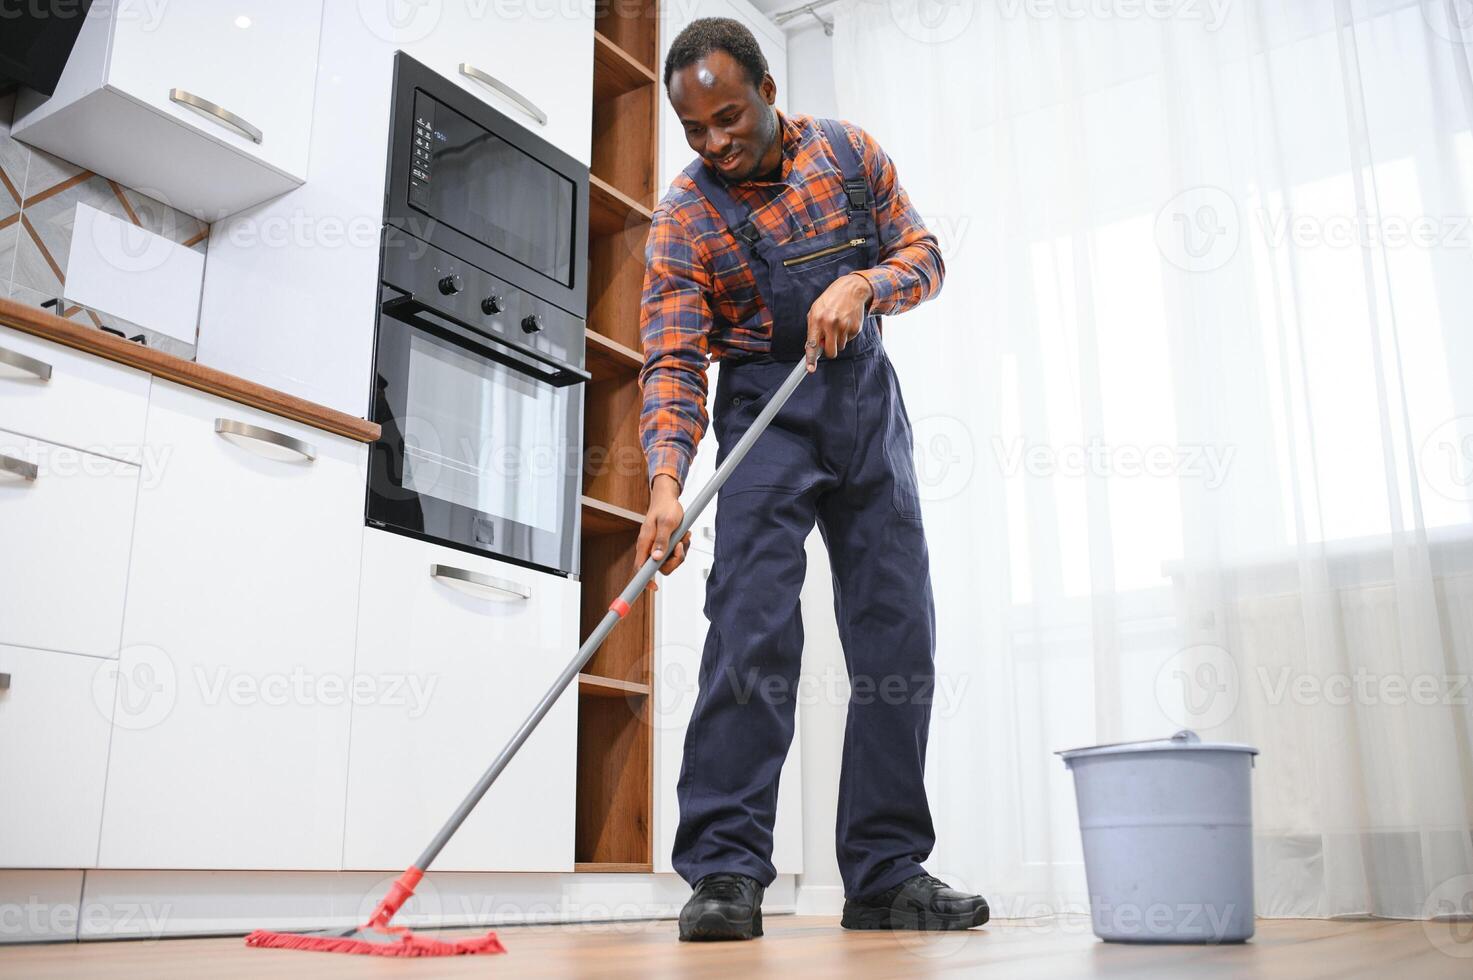 Young african man washes the floor with a mop in the room photo